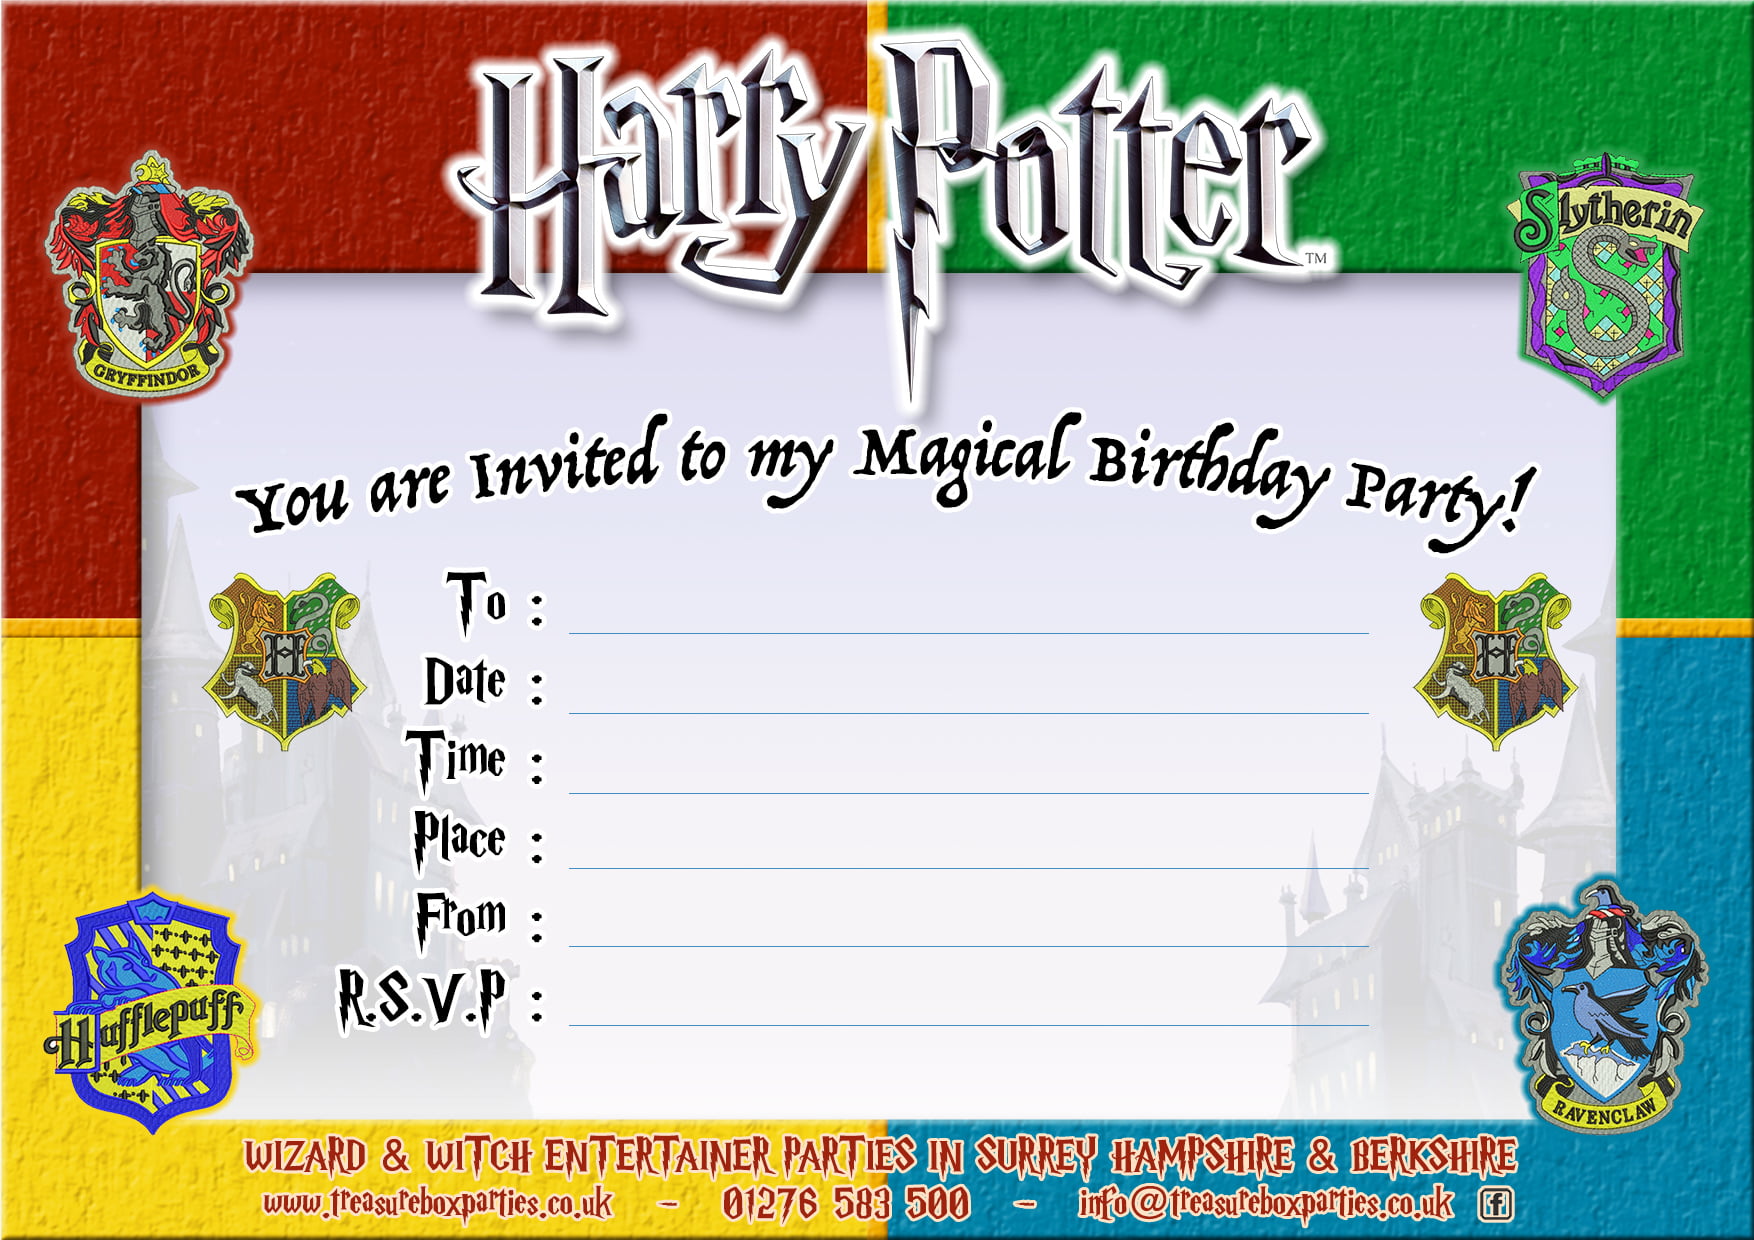 Harry Potter Birthday Party Invitations FREE Printable Baby Shower Invitations Templates